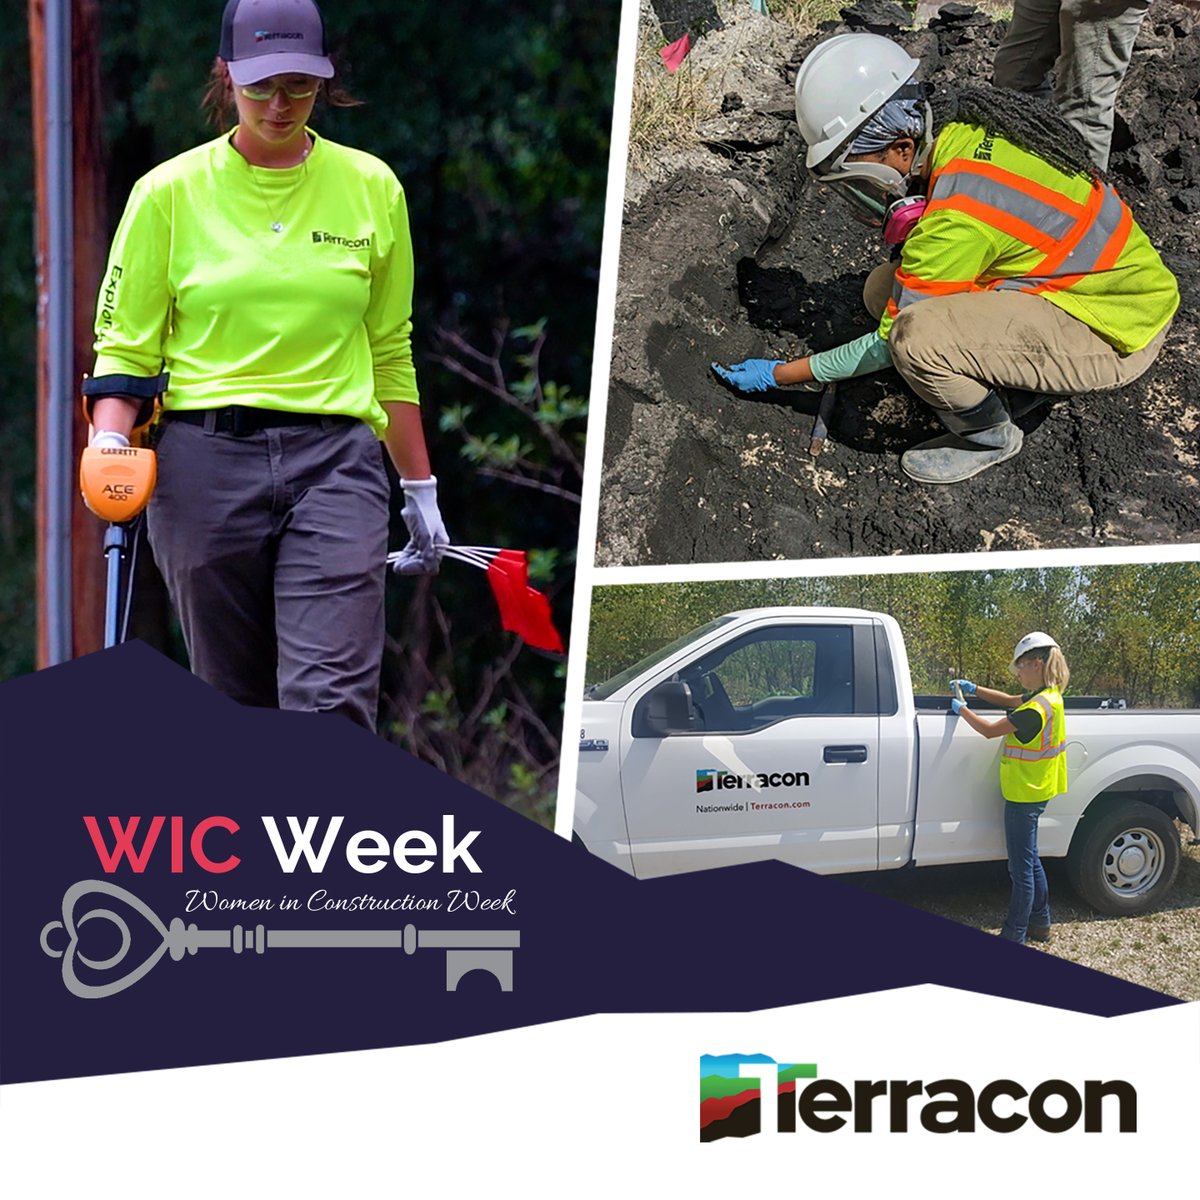 This Women in Construction (WIC) Week, we recognize the many women whose expertise and dedication are keys to the future of the construction industry. We’re excited to be part of expanding opportunities for women in construction. wicweek.org #WomeninConstruction